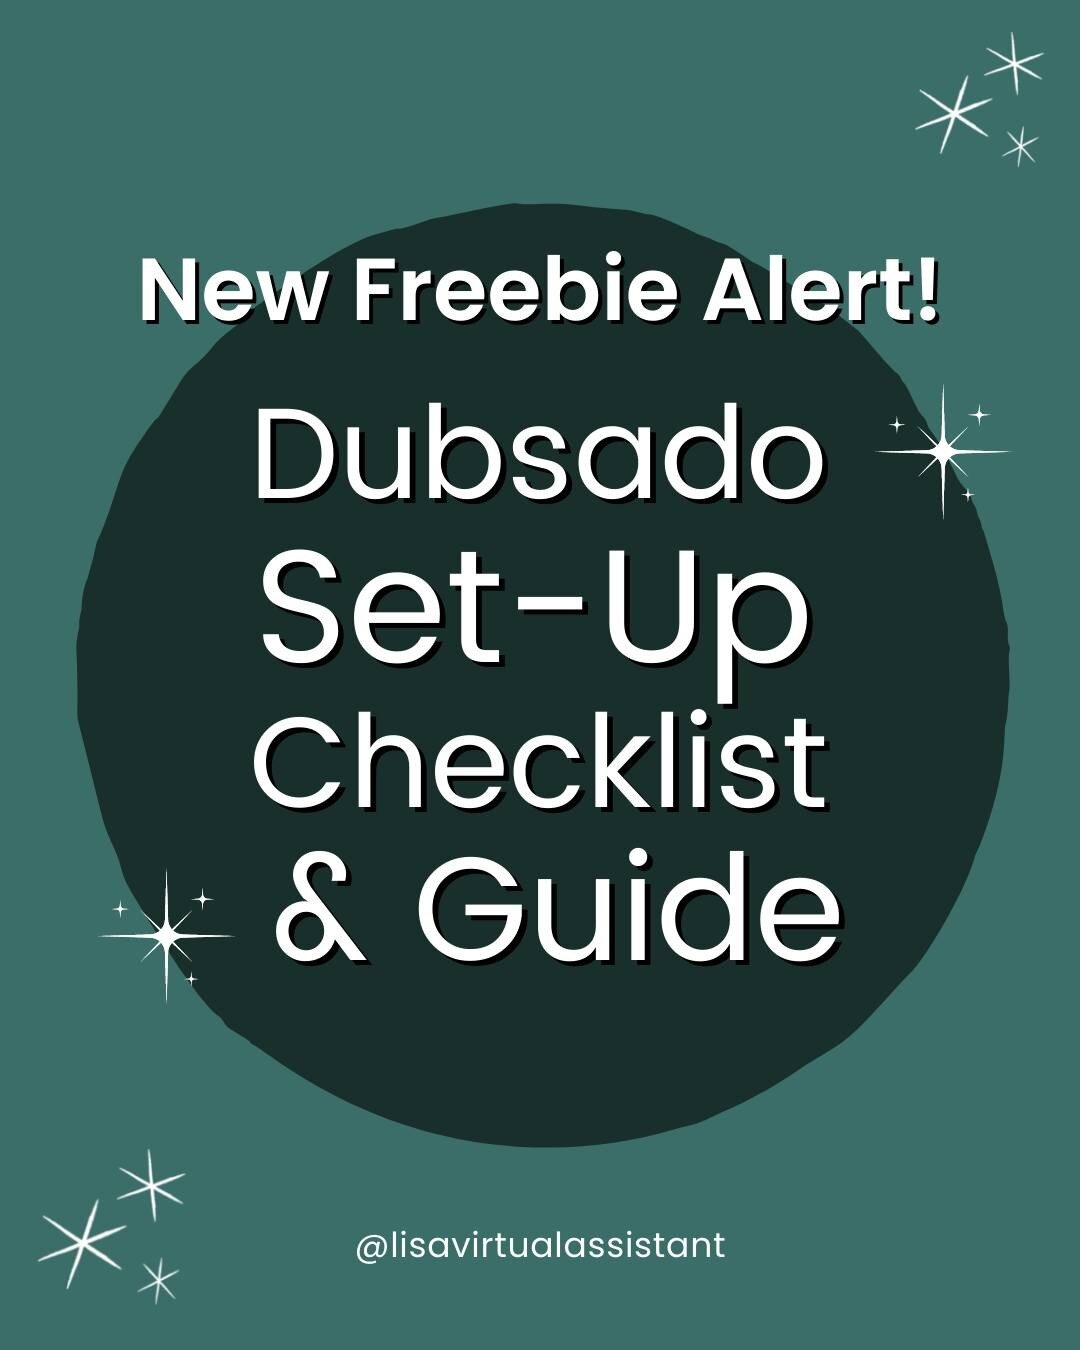 Dubsado Set-Up Checklist &amp; Guide 

New Freebie Alert! 🚨

Introducing the Dubsado Set-Up Checklist &amp; Guide✨

I created this checklist as it&rsquo;s no secret - Dubsado can be a learning curve.

To help you come to grips with your Dubsado acco